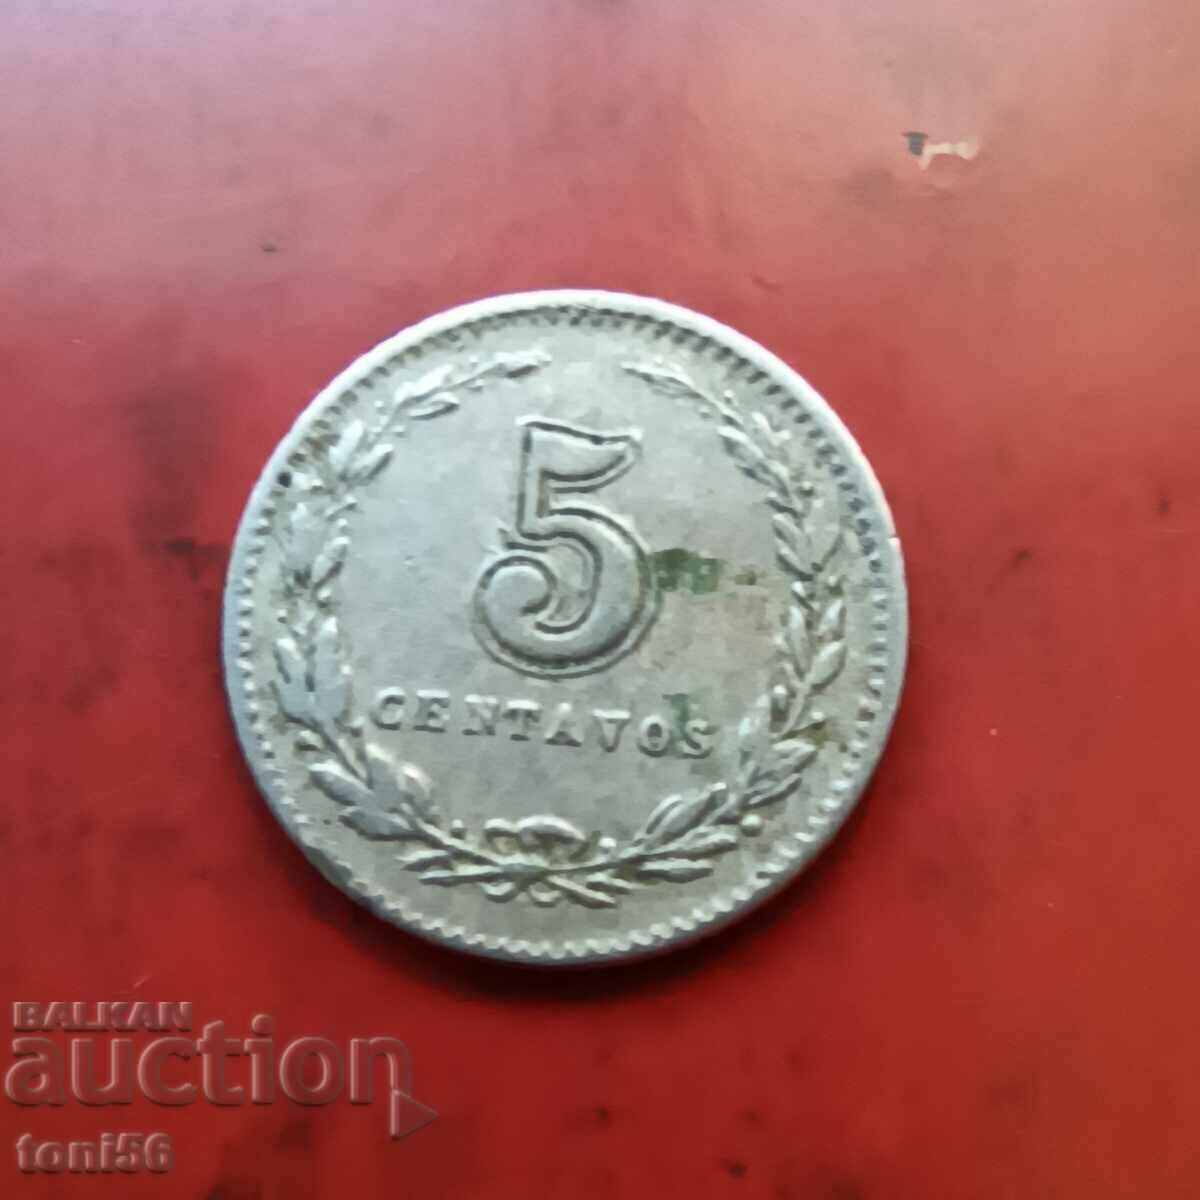 Argentina 5 centavos 1897 - from collection